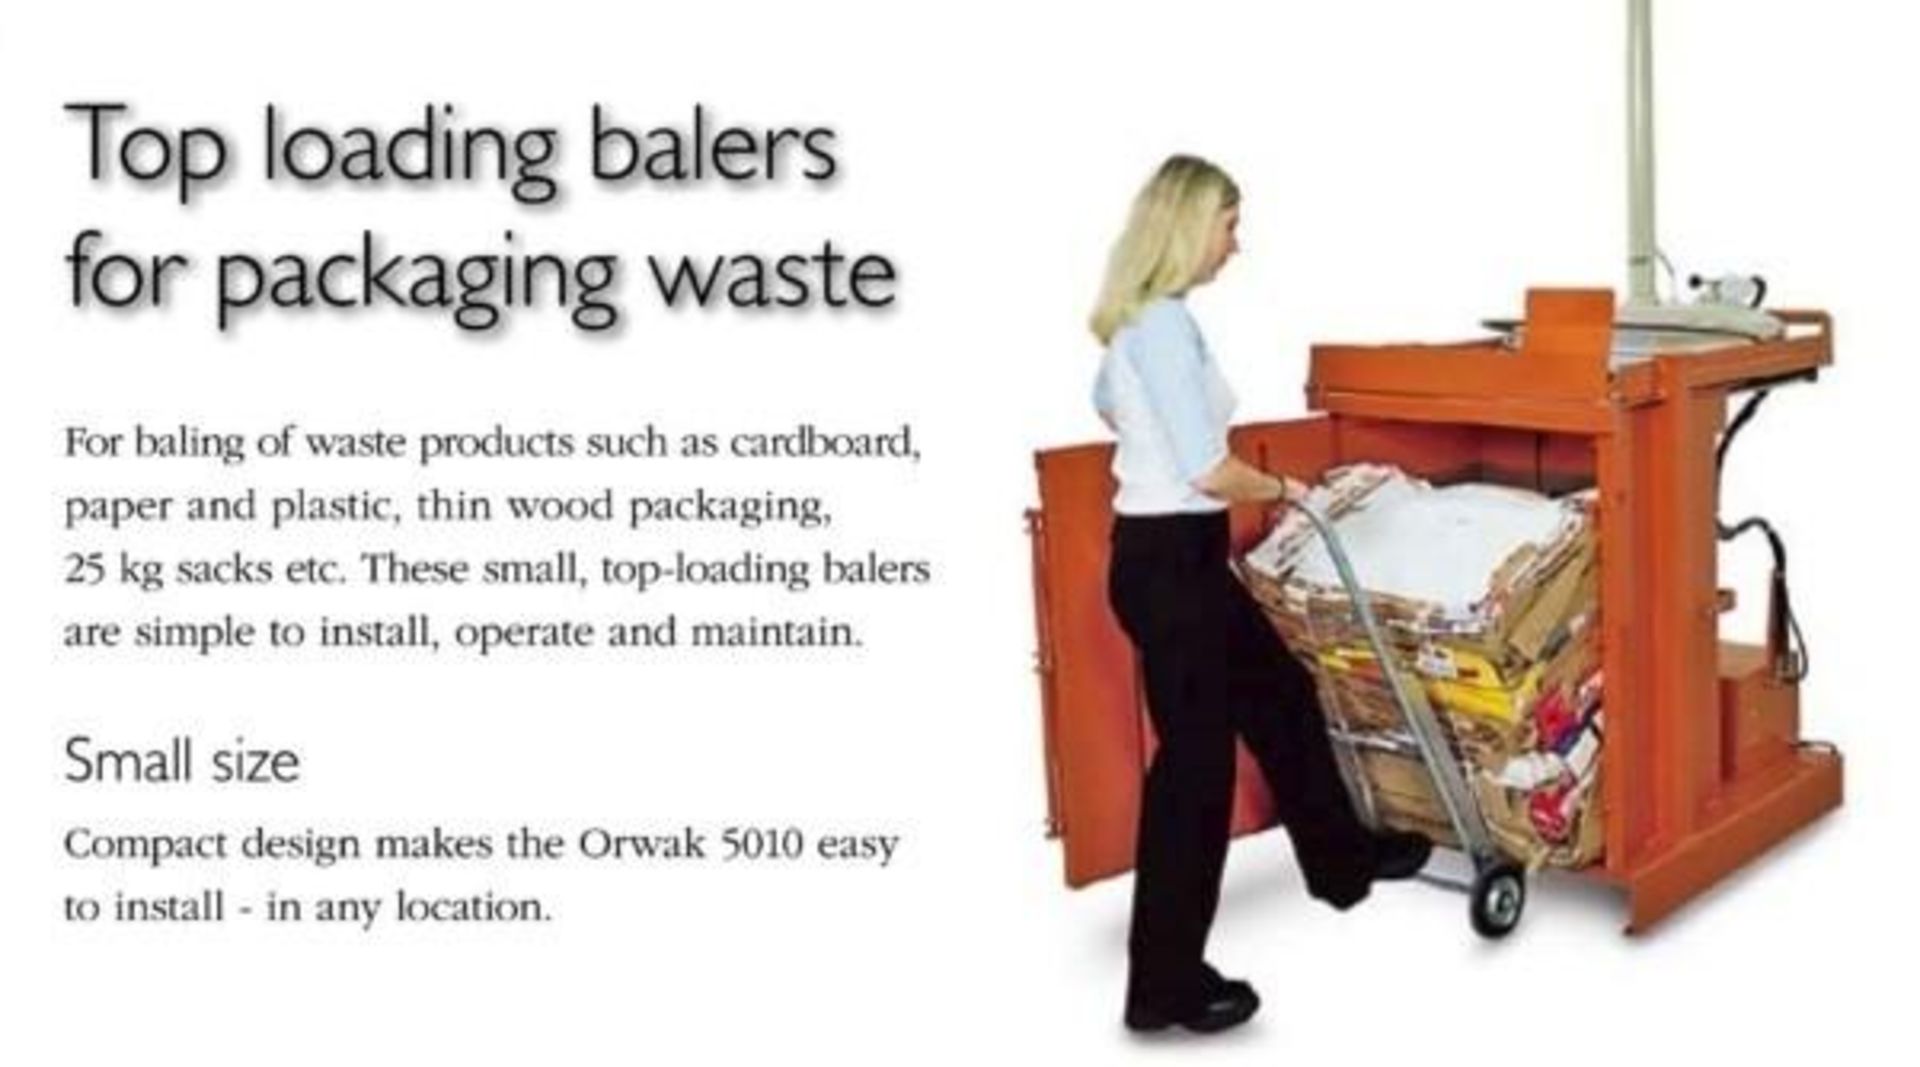 1 x Orwak 5010 Top Loading Baler -  Fully Tested and Working, Very Good Condition - CL011 - Location - Image 3 of 5